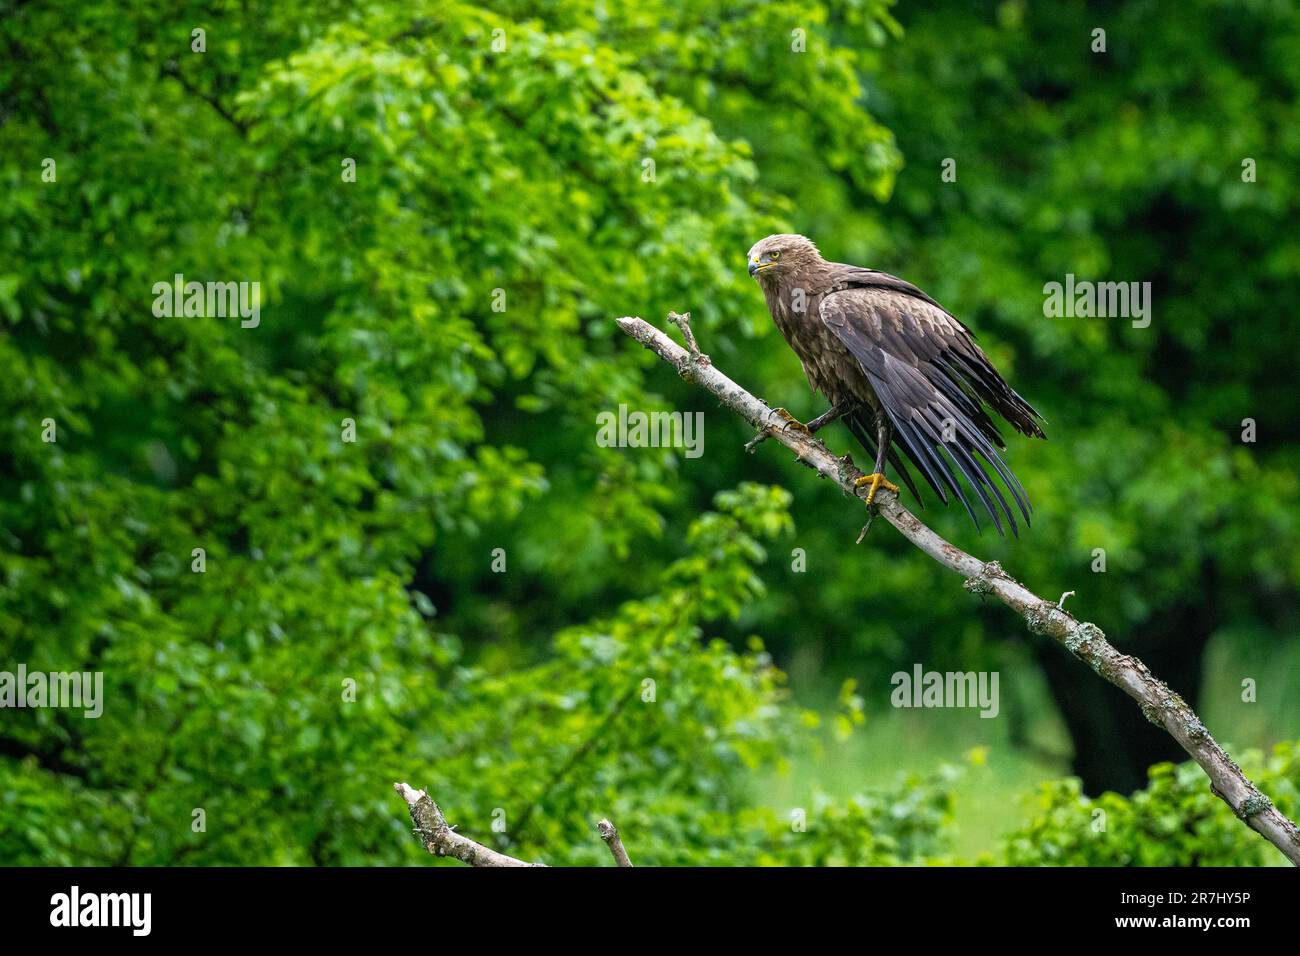 The lesser spotted eagle, Clanga pomarina, perching on a branch into its natural habitat in Carpathians, Poland. Stock Photo